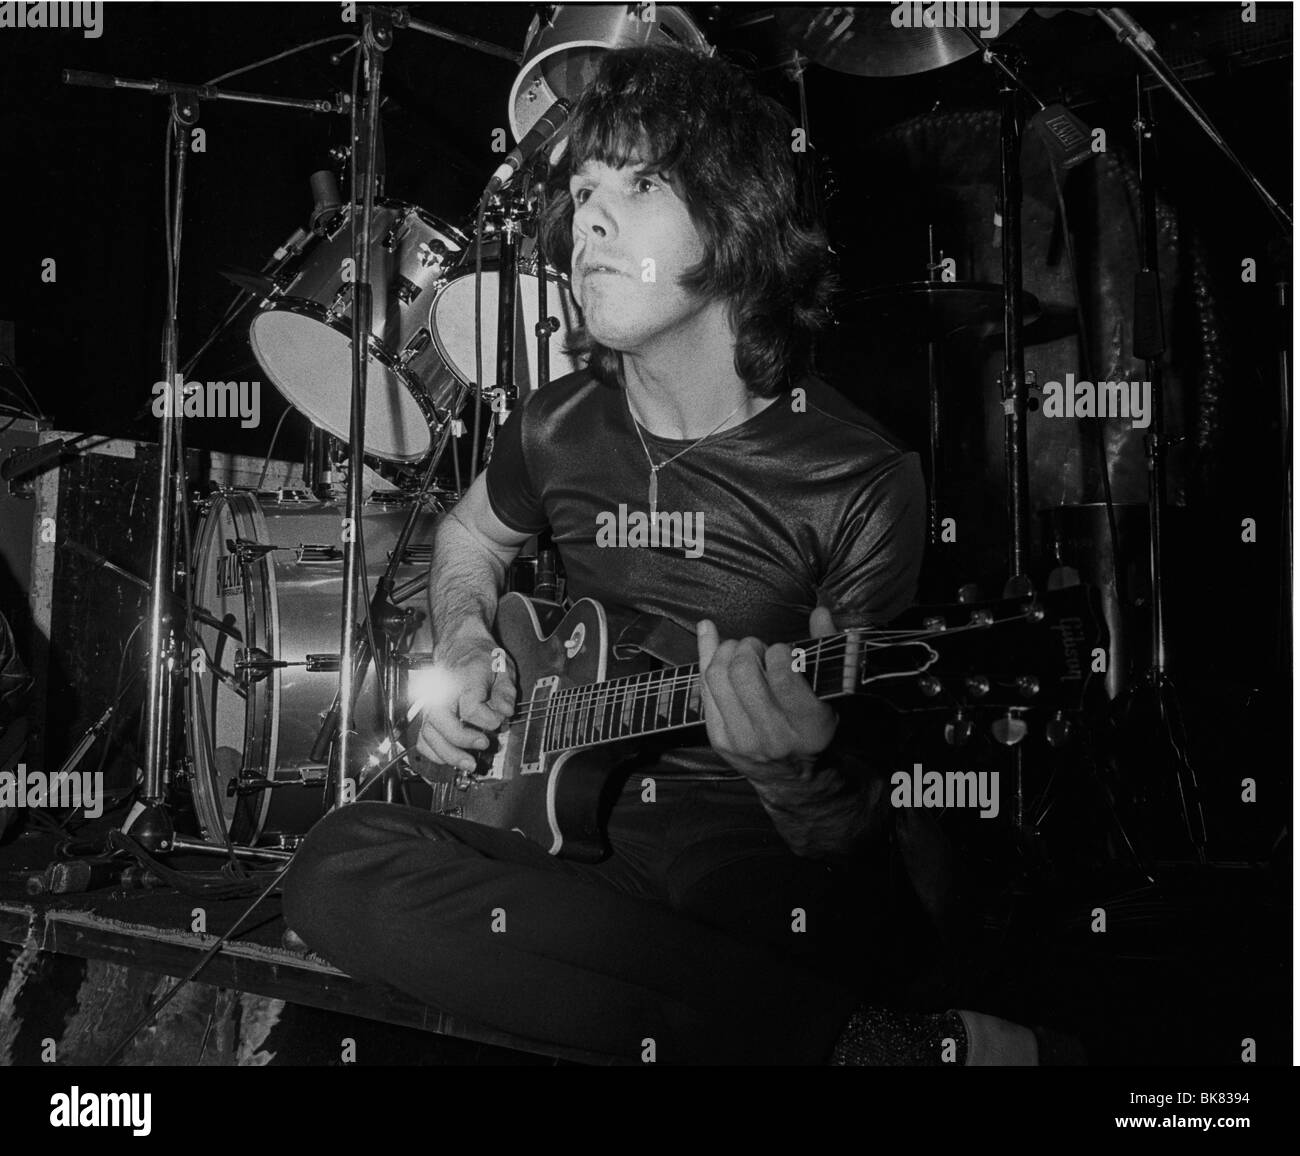 Gary moore guitarist hi-res stock photography and images - Alamy